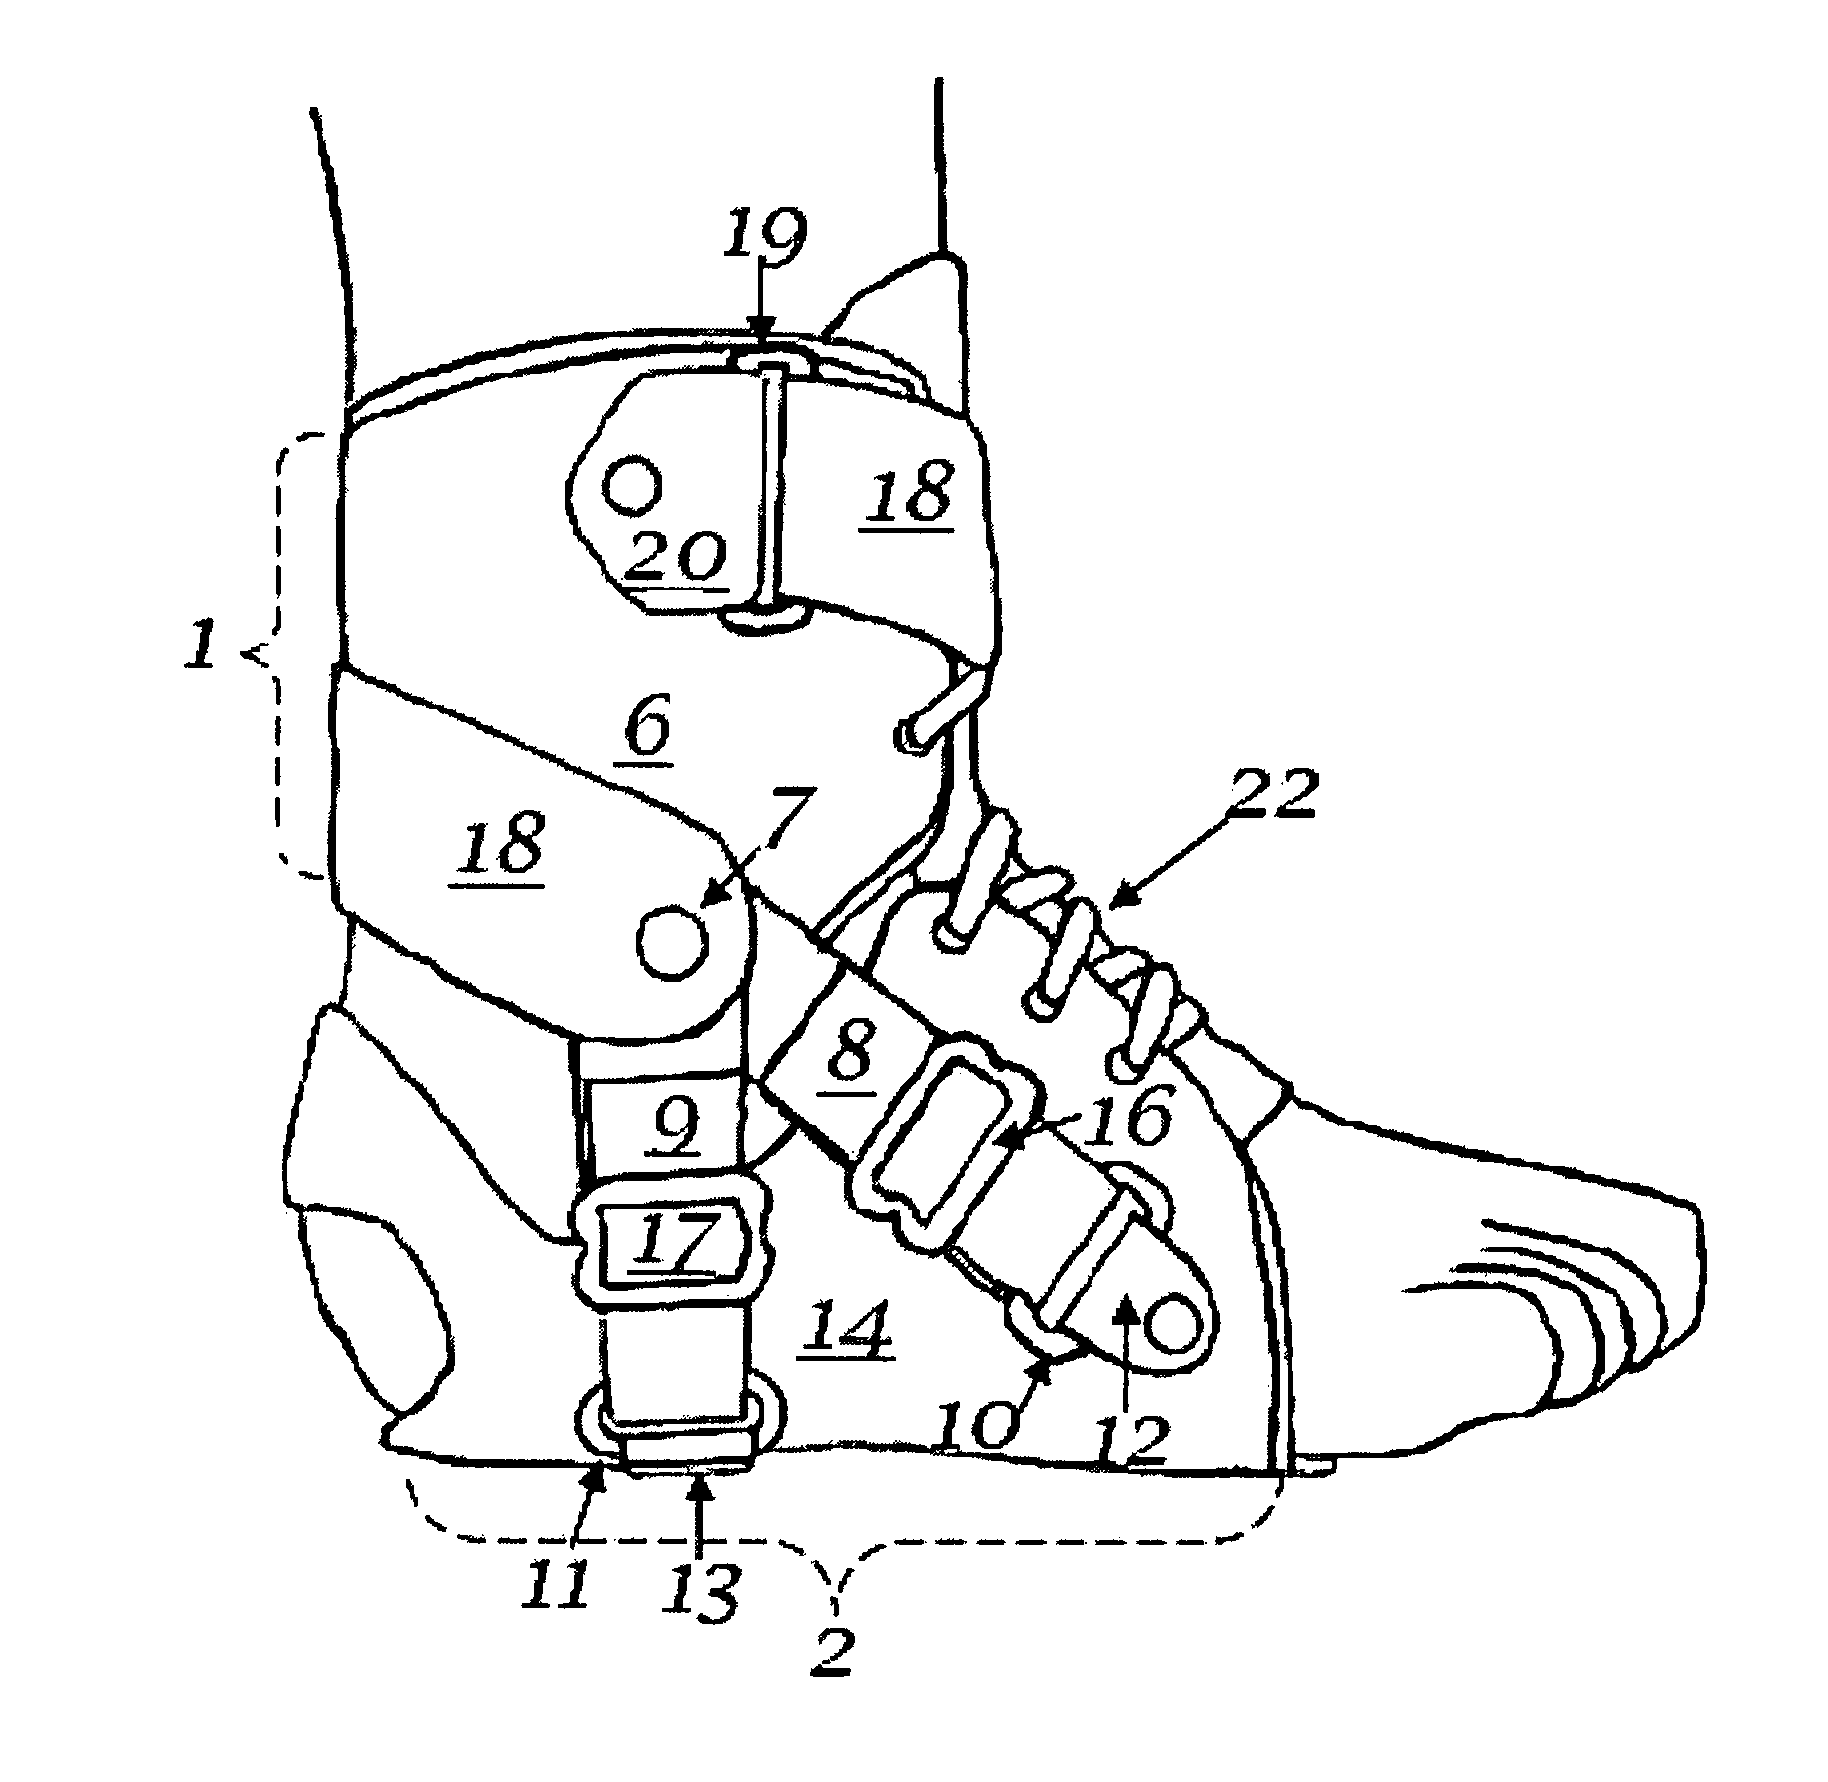 Ankle derotation and subtalar stabilization orthosis